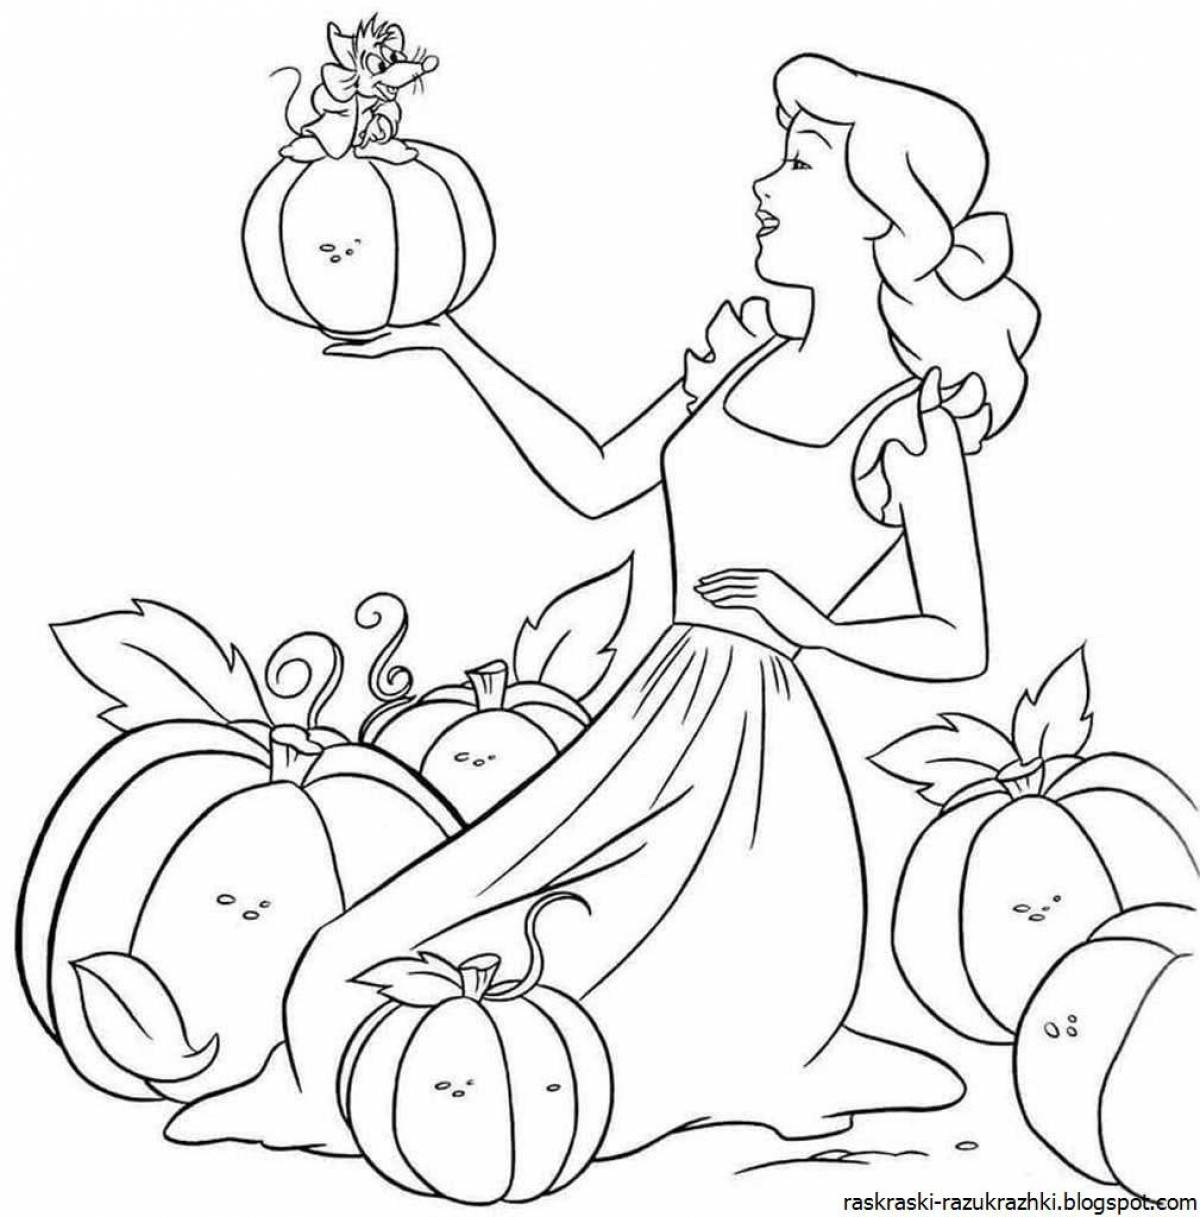 Charming Cinderella coloring book for kids